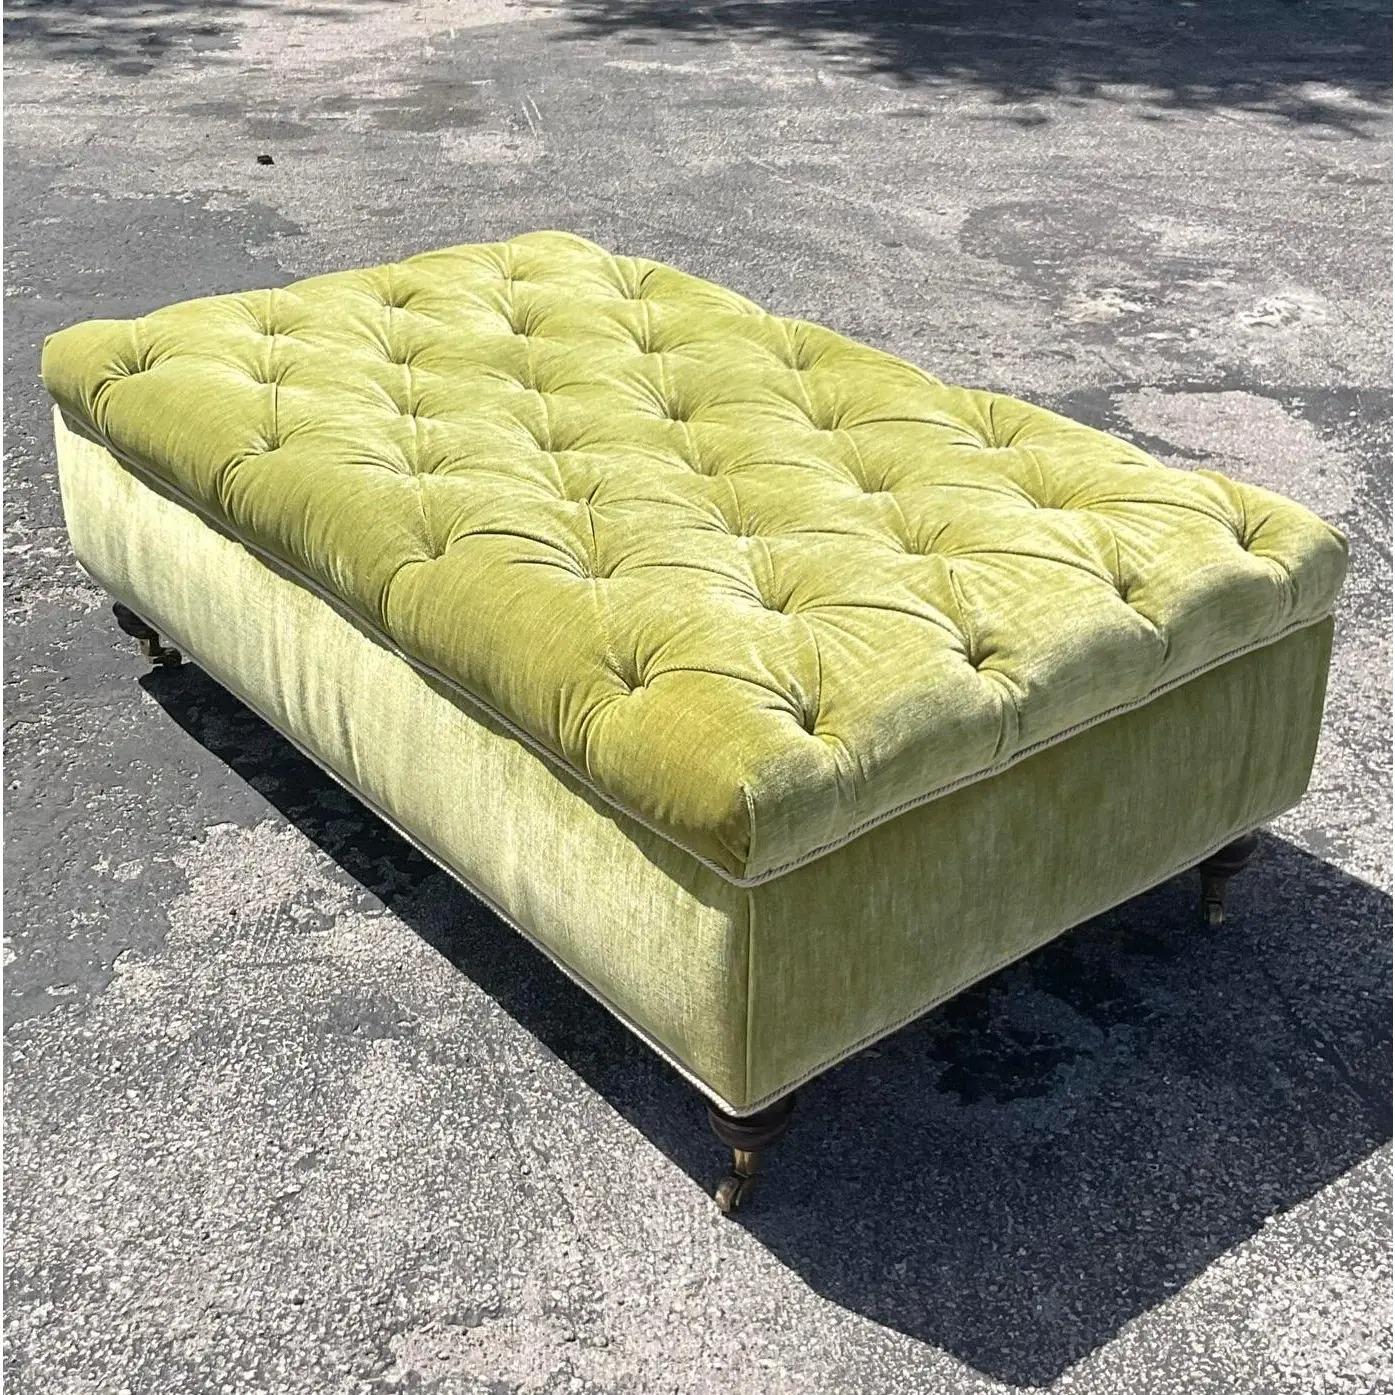 A fabulous vintage Tufted ottoman. A classic turned wooden leg design with a bright apple green velvet. Perfect as is or reupholster to coordinate with your project. You decide! Acquired from a Palm Beach estate.